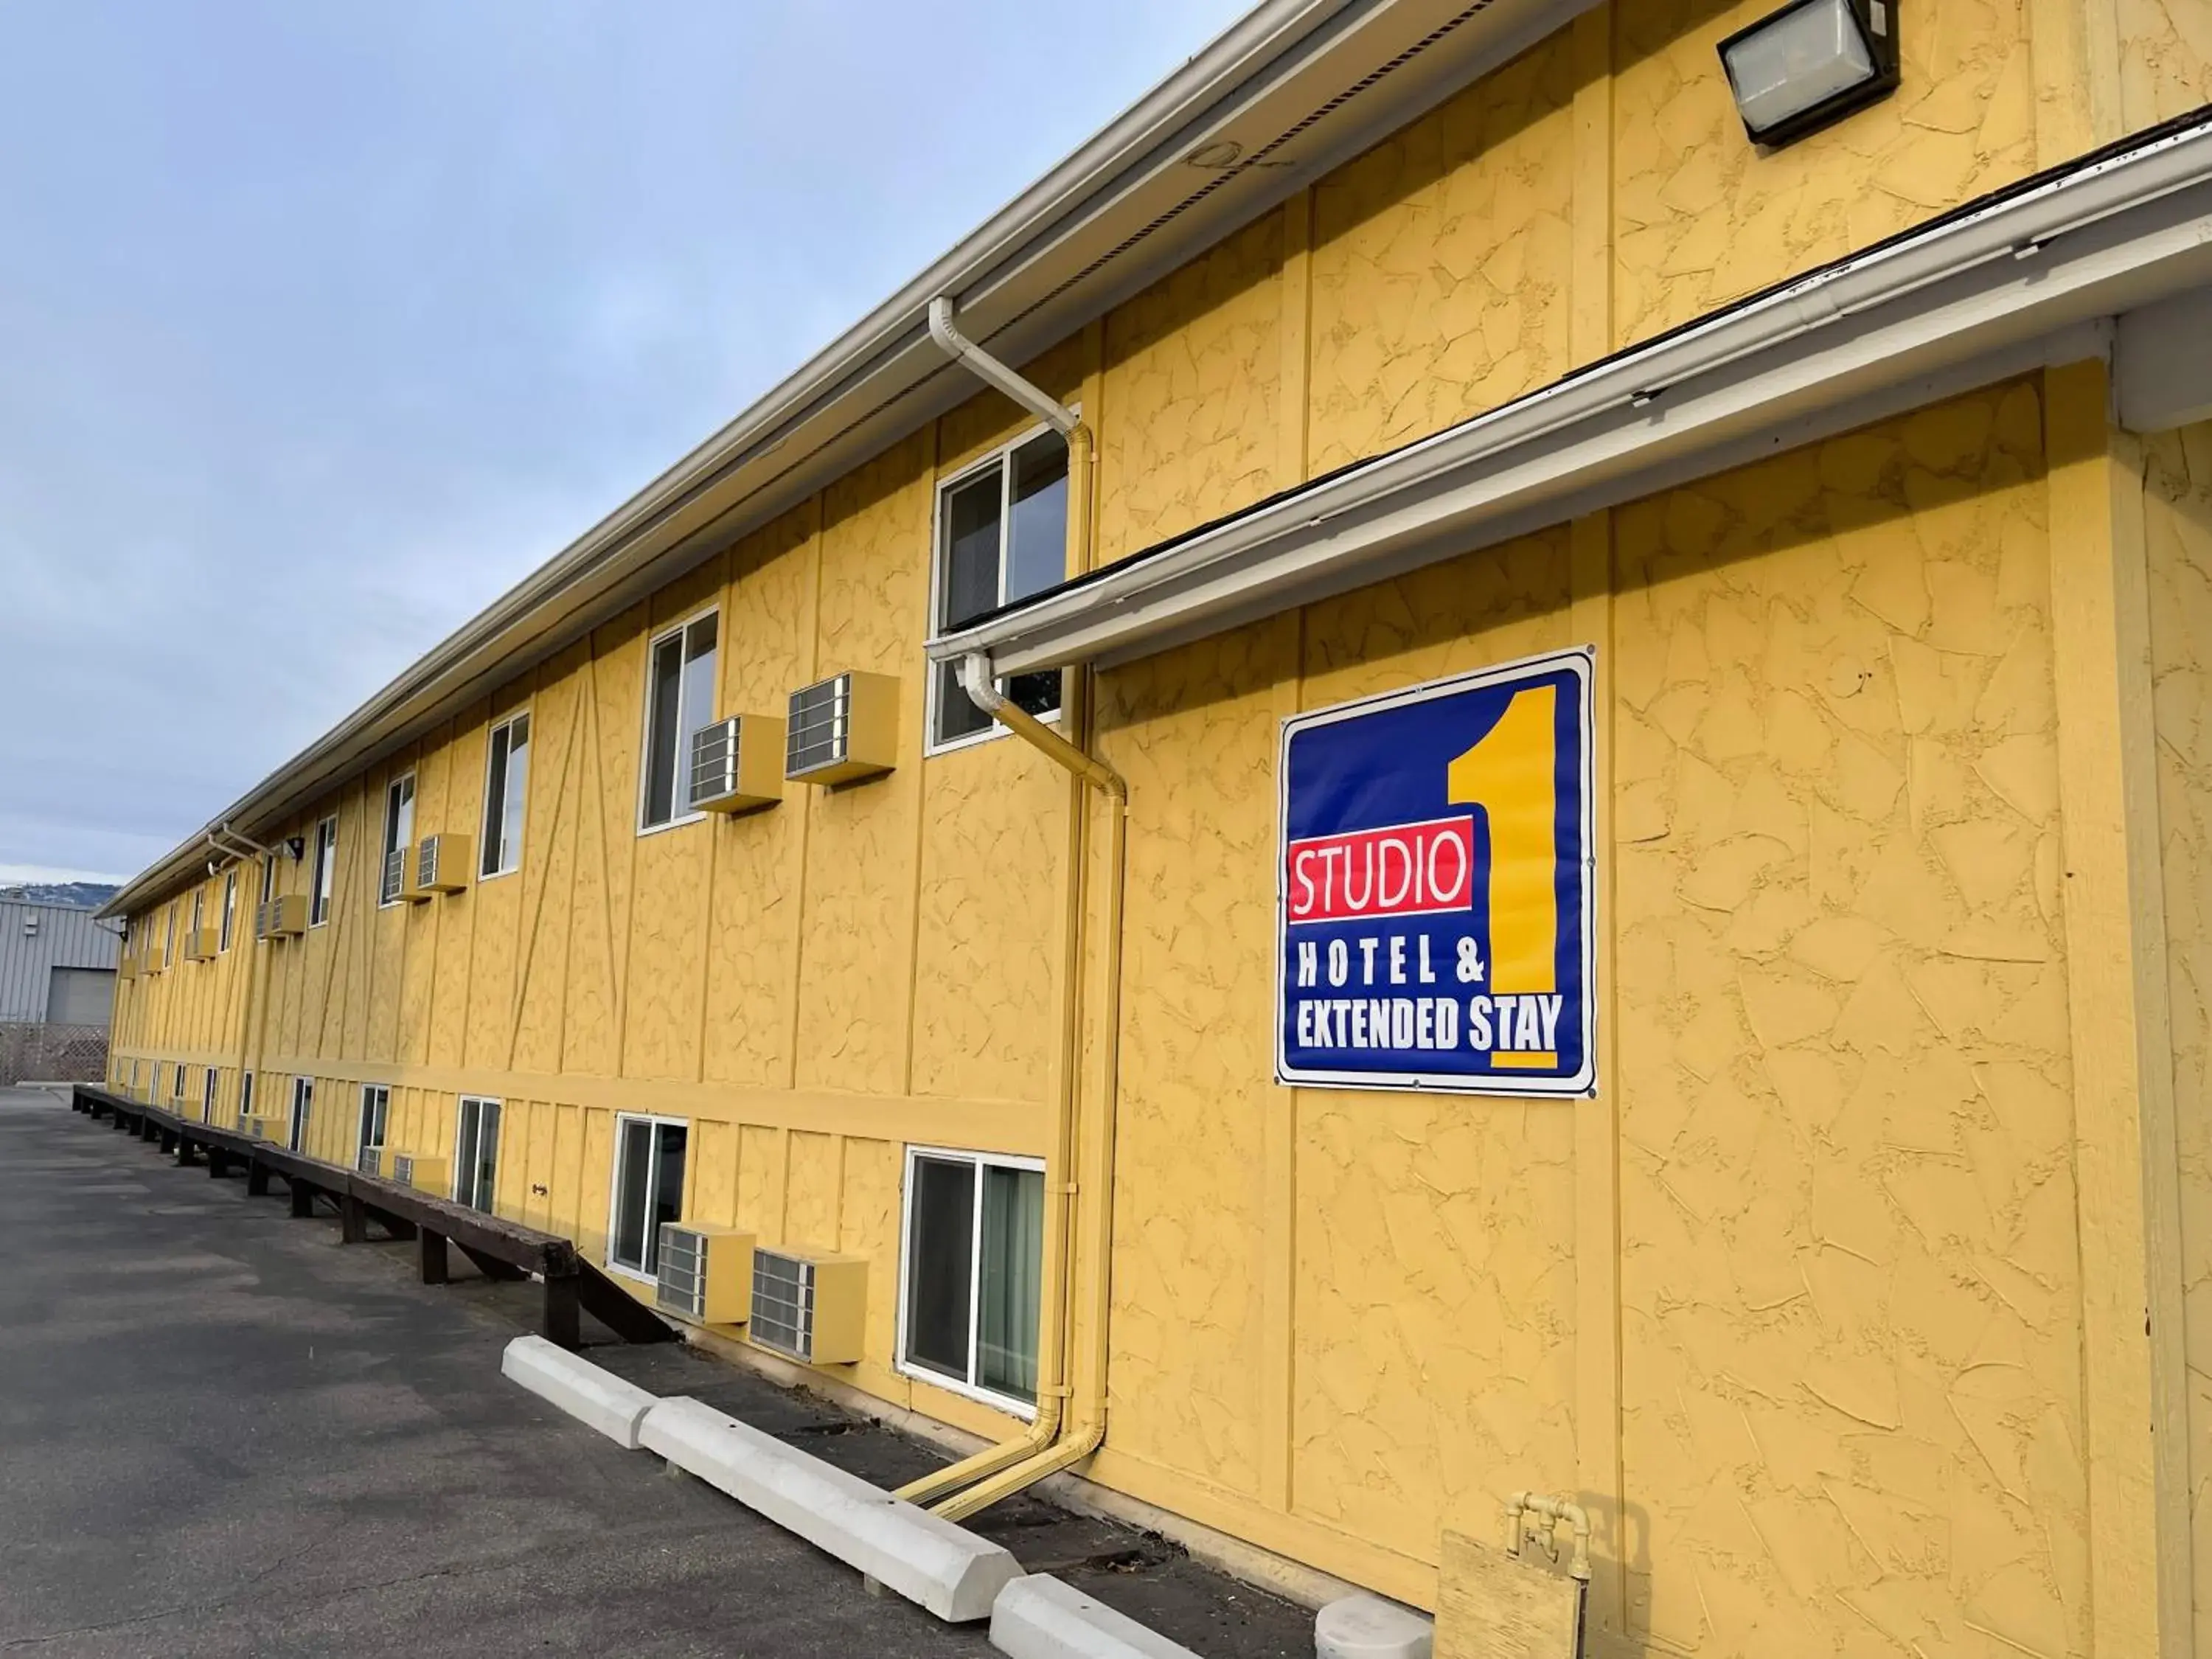 Property Building in Studio 1 Hotel & Extended Stay - Missoula